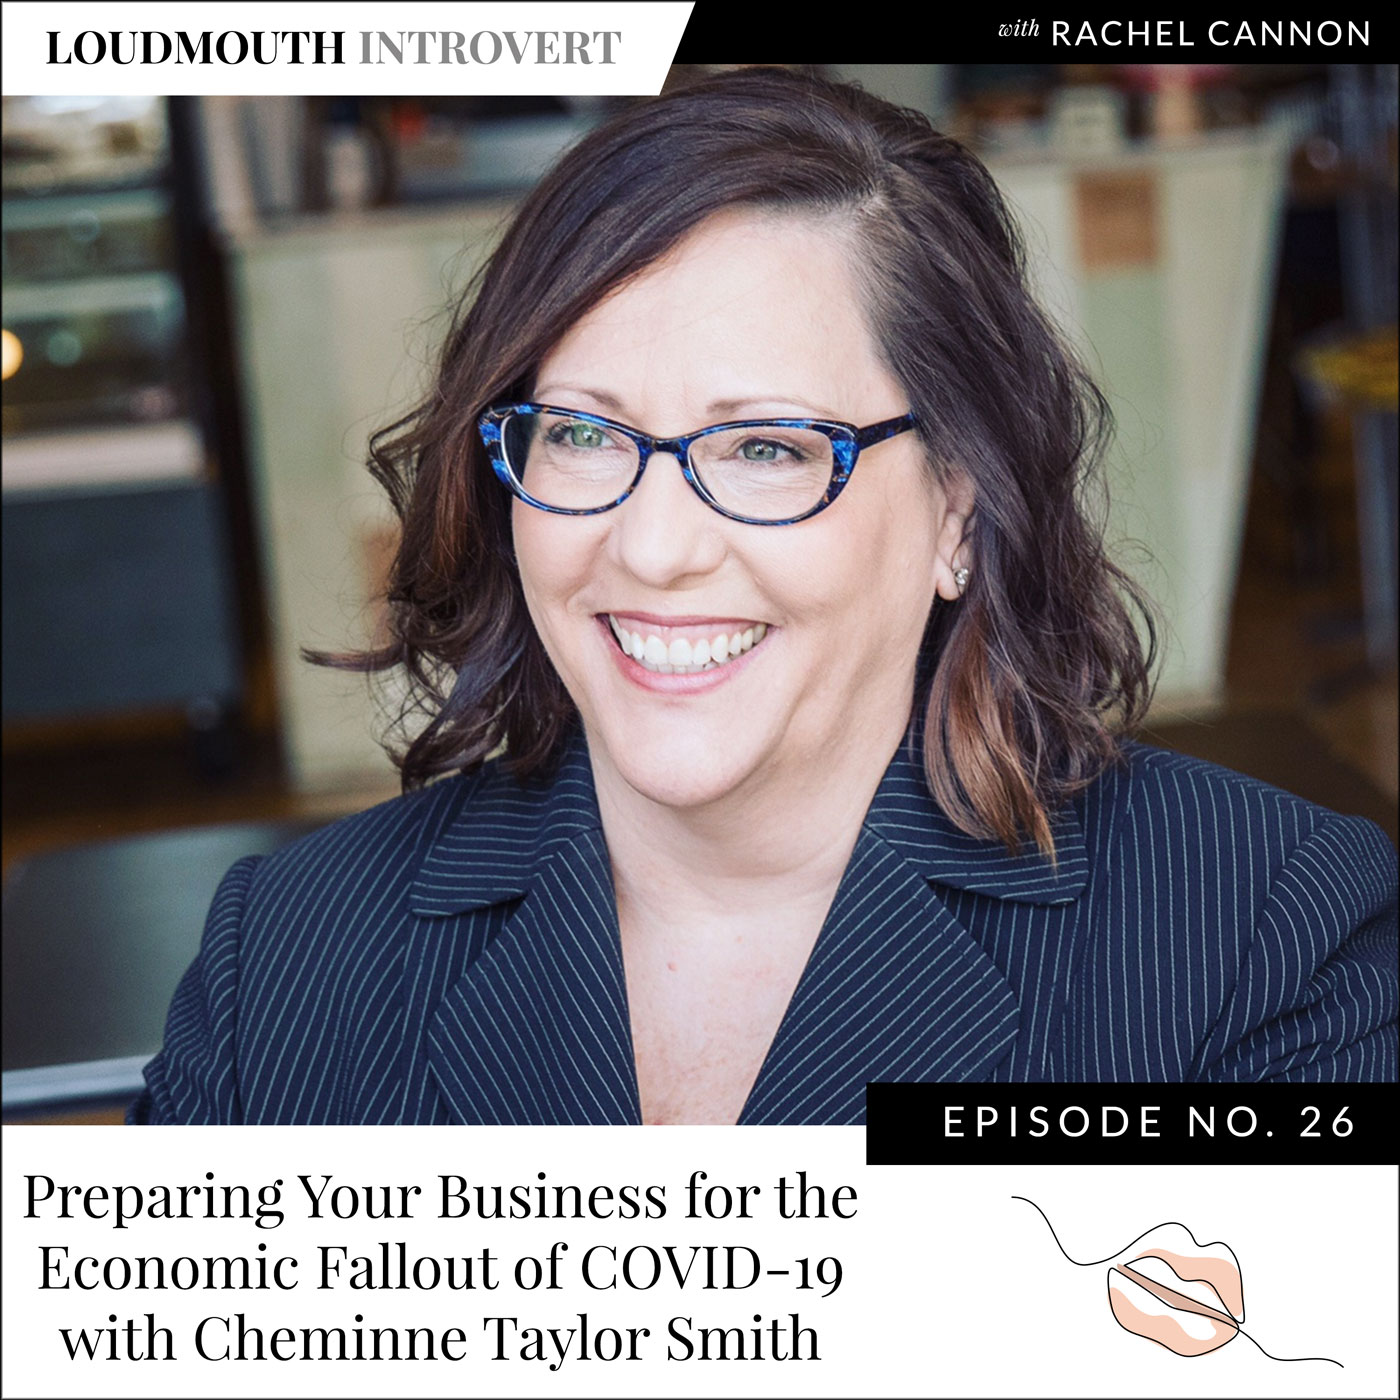 Preparing Your Business for the Economic Fallout of COVID-19 with Cheminne Taylor Smith